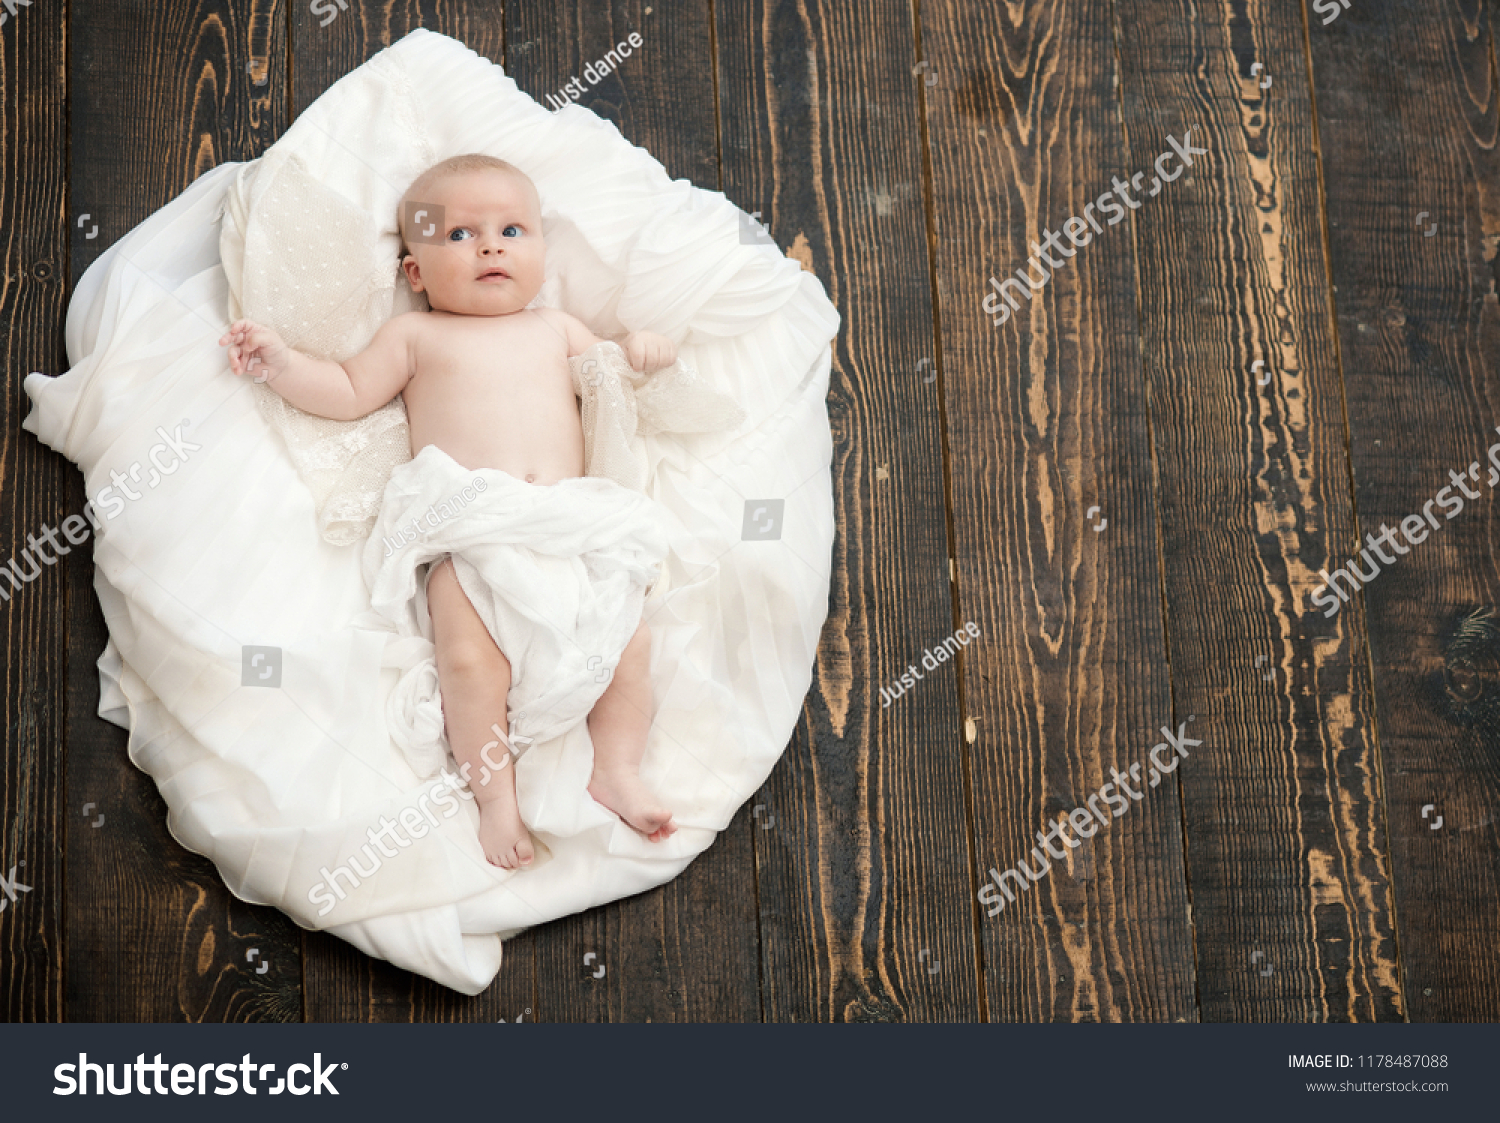 Newborn toddler with blue eyes and curious face on wooden background. Infant covered with white blanket. Baby lying on white soft duvet designed as cloud or nest. Childhood and innocence concept #1178487088